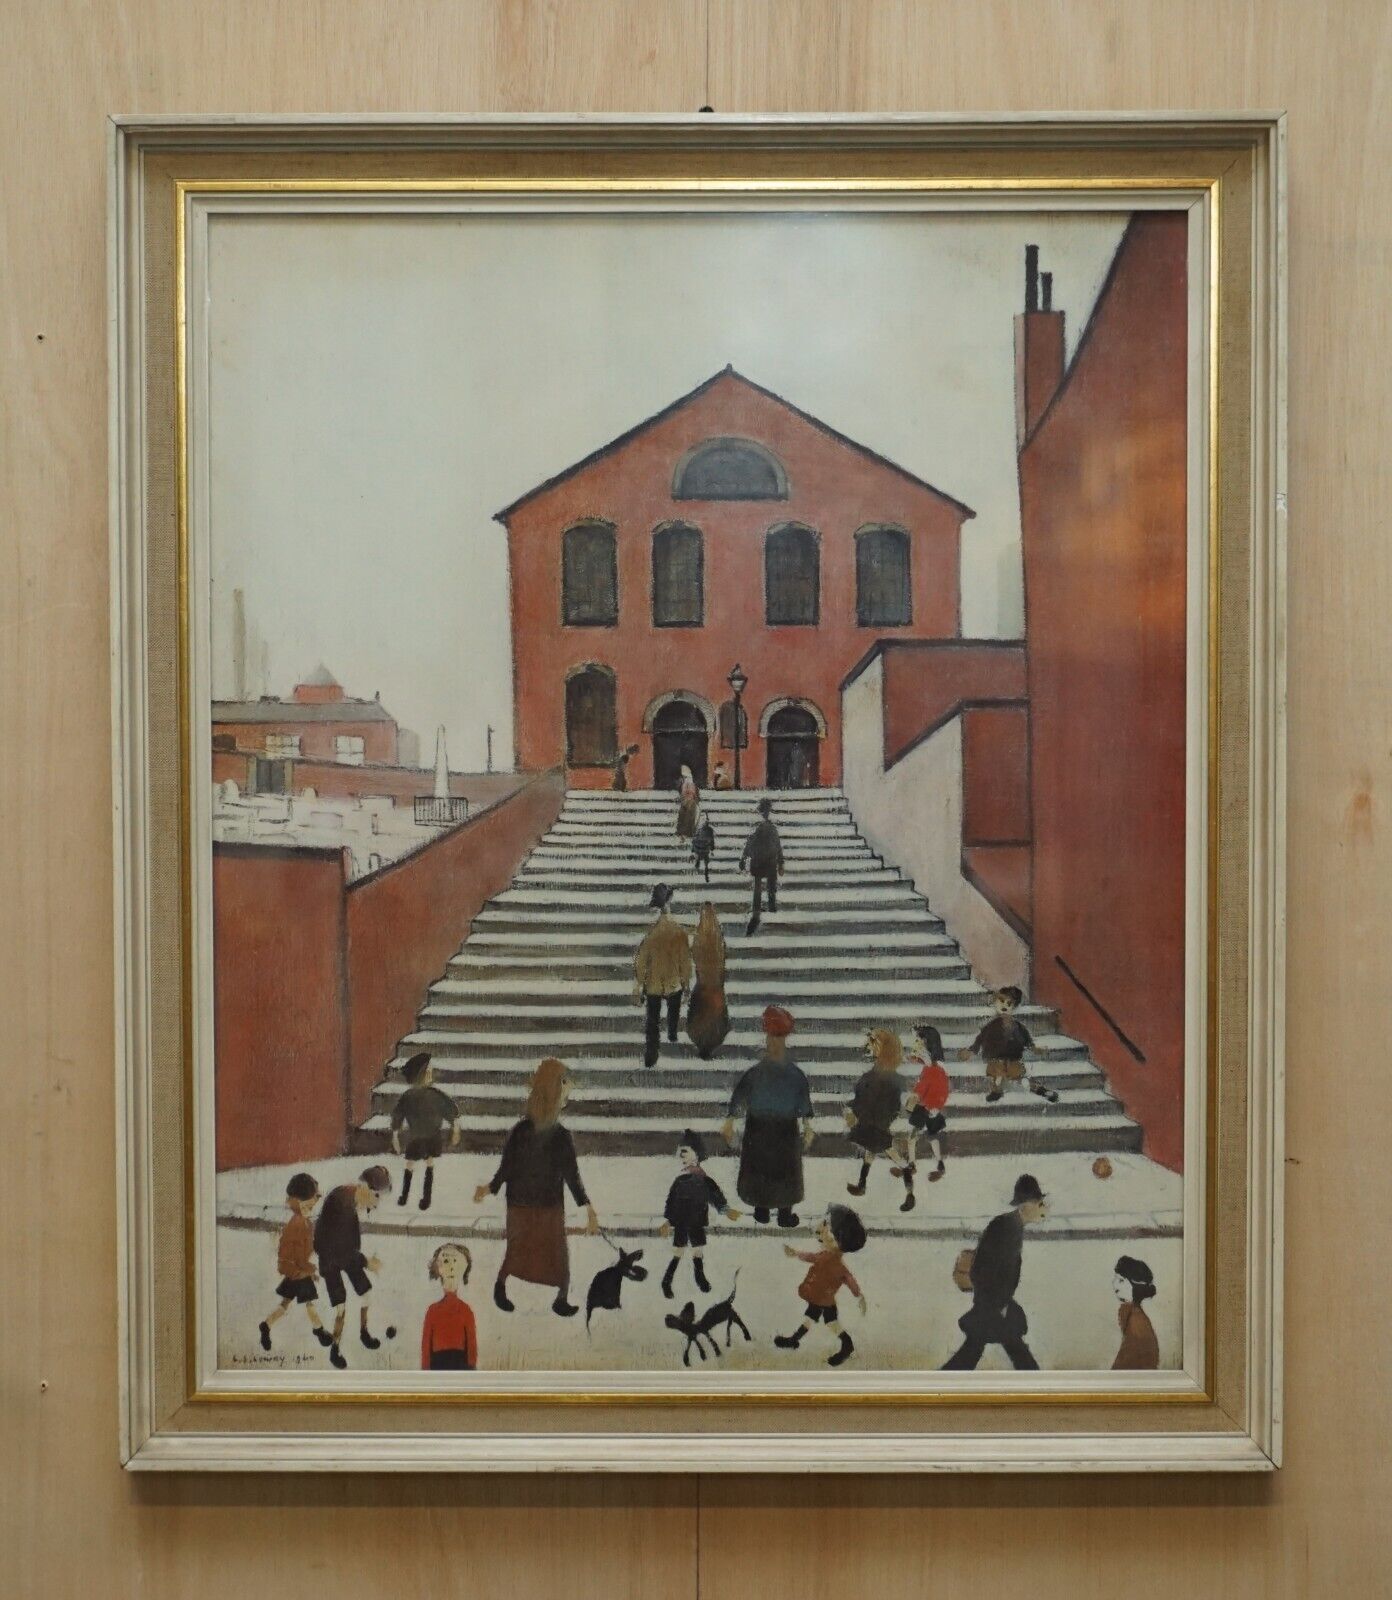 L S LOWRY 053 THE OLD CHURCH PRINT WITH GANYMED LABEL T & R ANNAN & SONS LTD